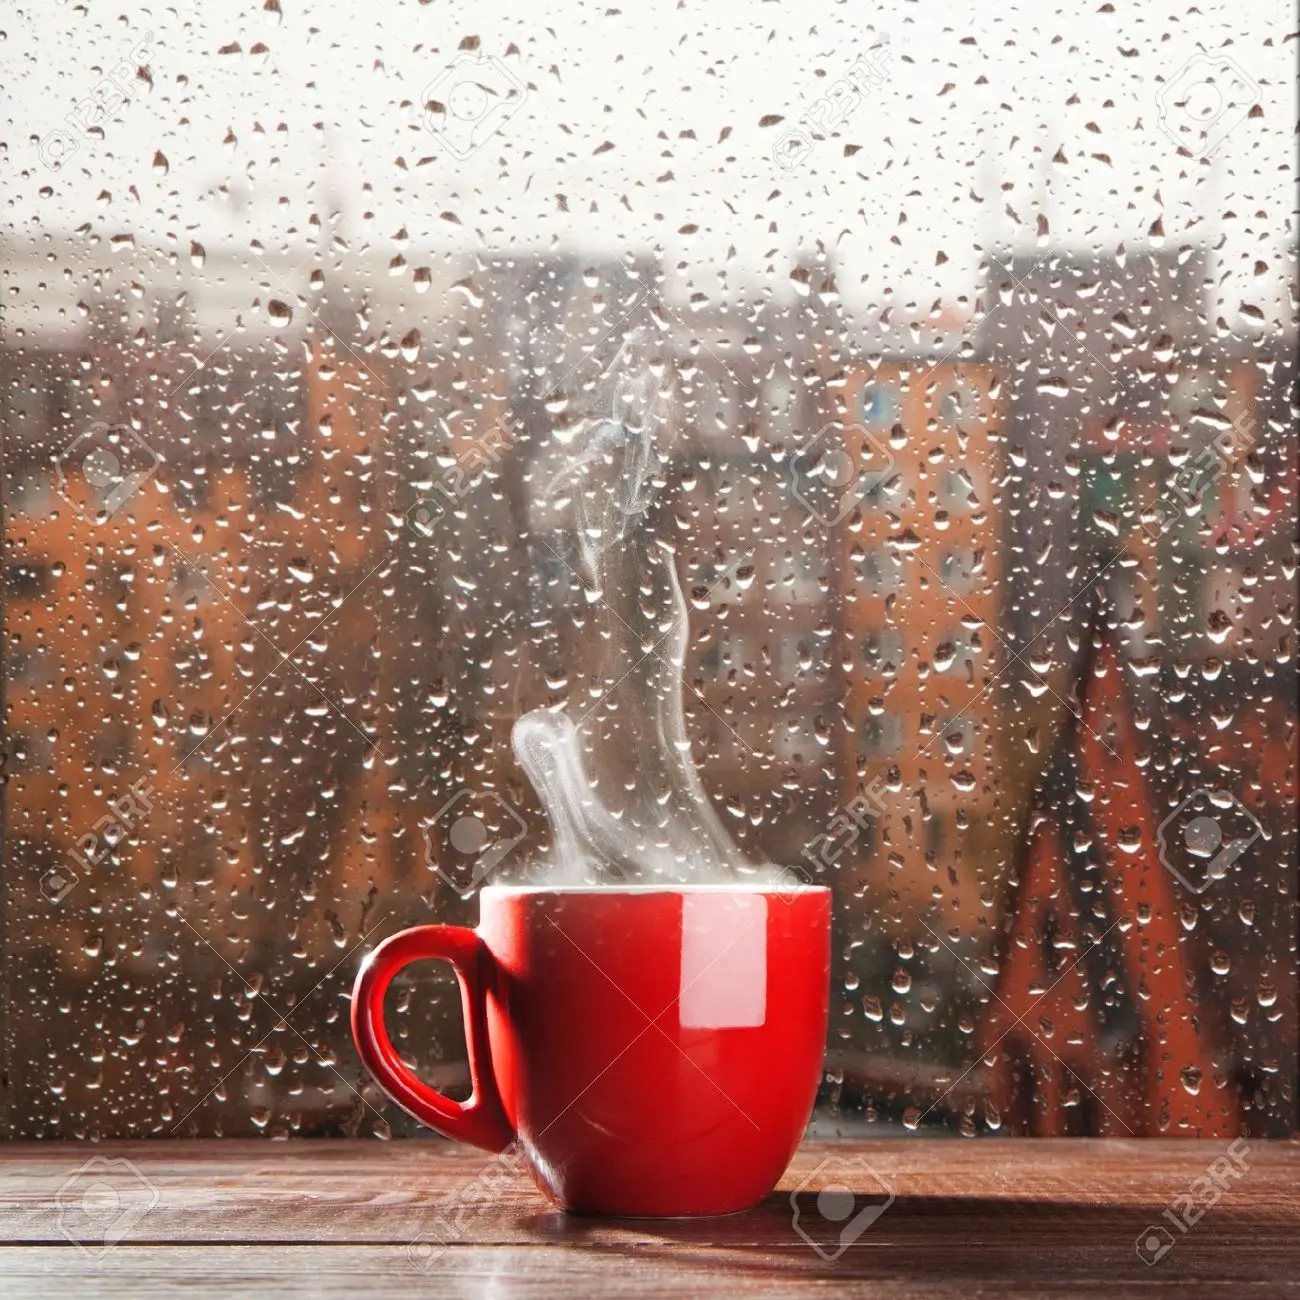 steaming-coffee-cup-on-a-rainy-day-window